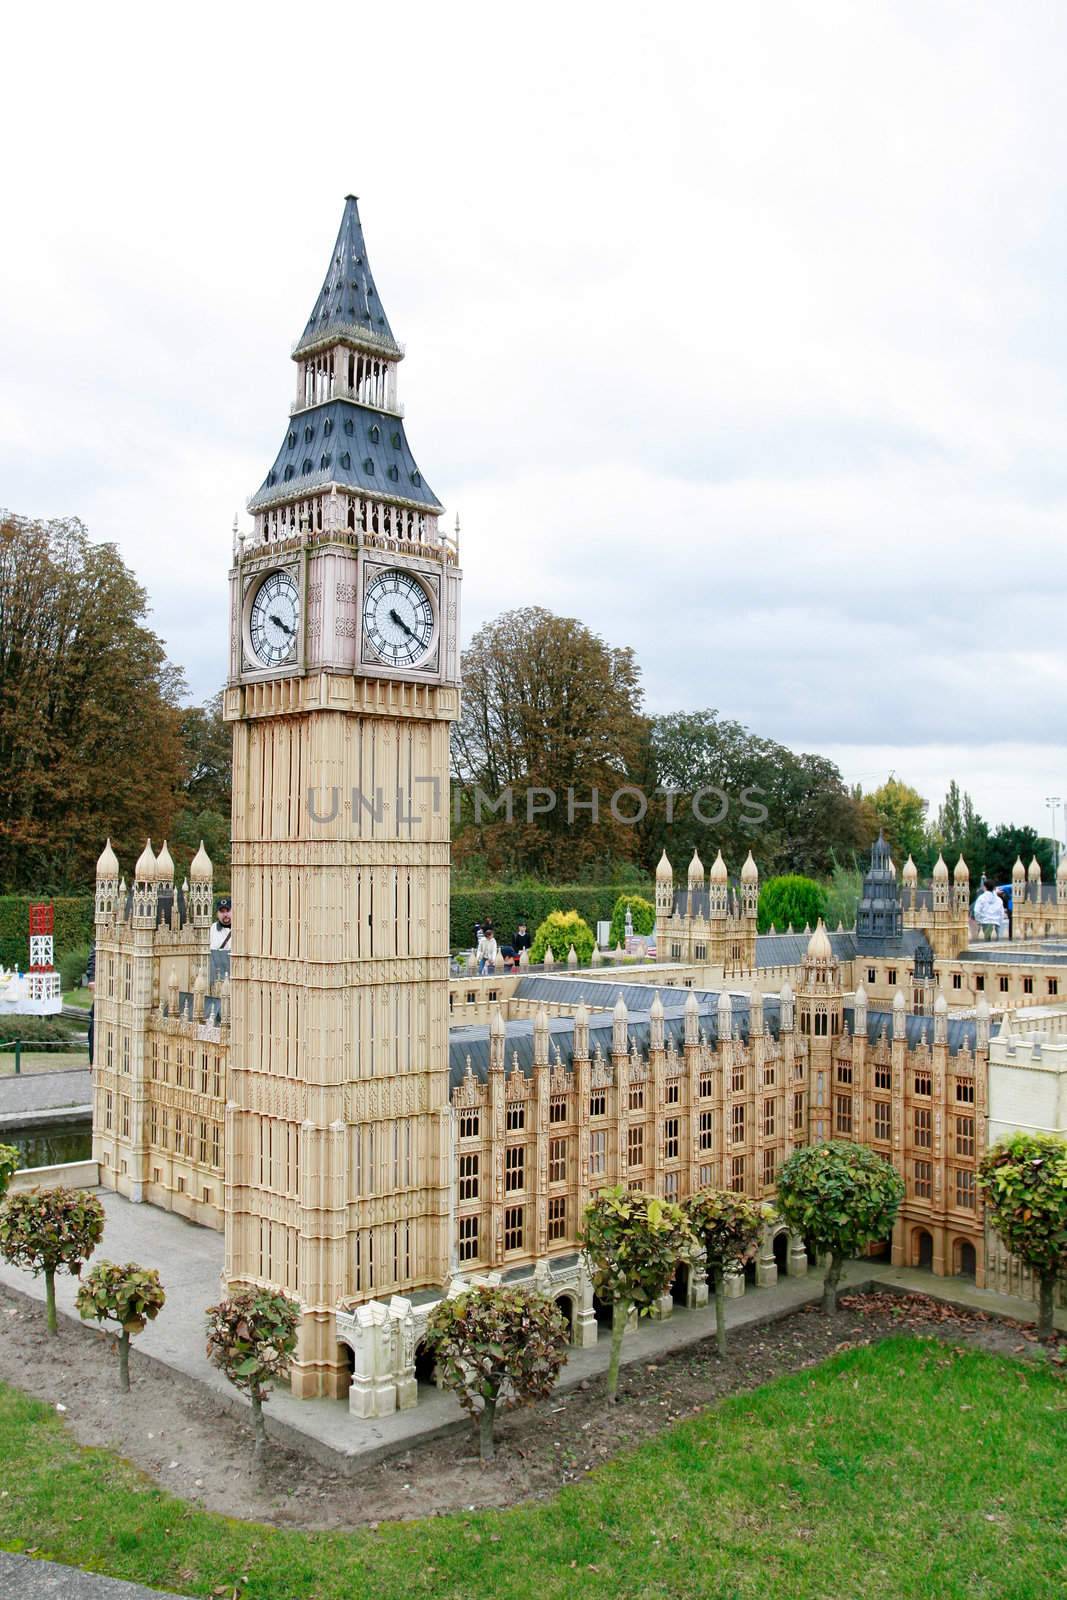 Miniature model of London Big Ben and Parliament in Mini Europe park by ints